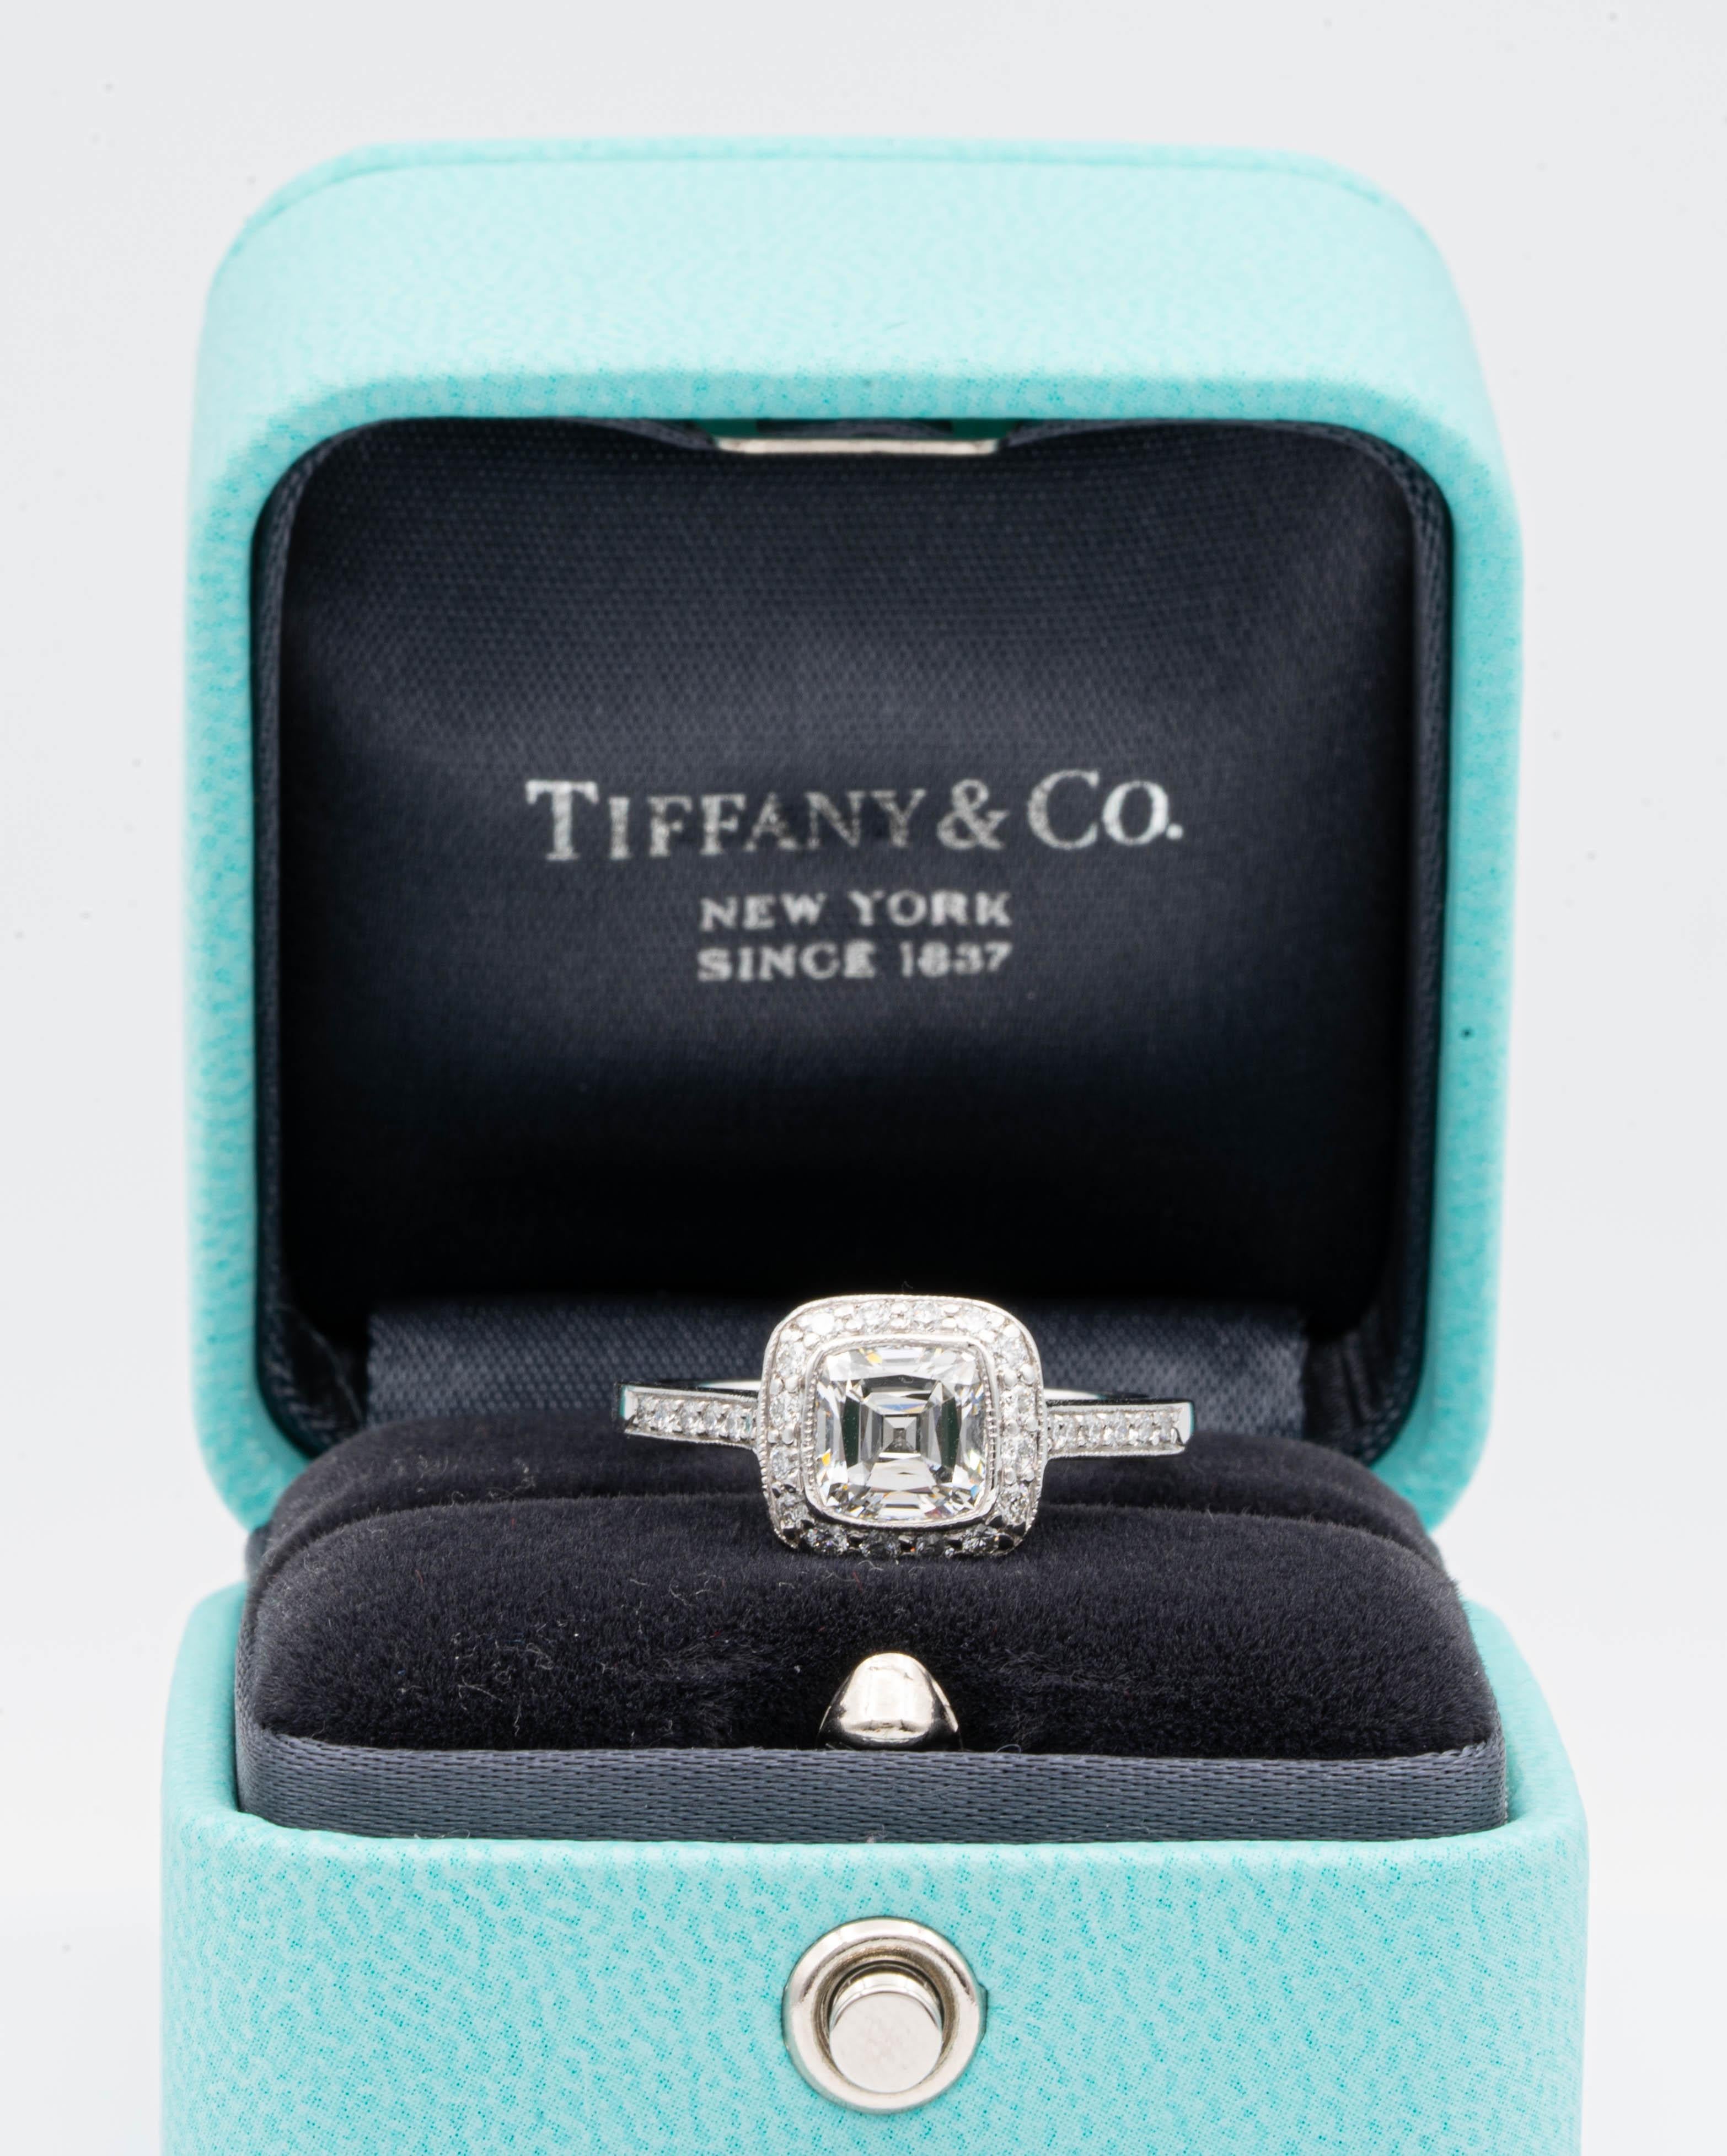 Tiffany & Co Cushion Brilliant Engagement Ring from the “Legacy” collection featuring a 1.22 carat center, G color, VS2 clarity, finely crafted in Platinum featuring dazzling bead-set diamonds in a full bezel millgrain design halo and half-way down